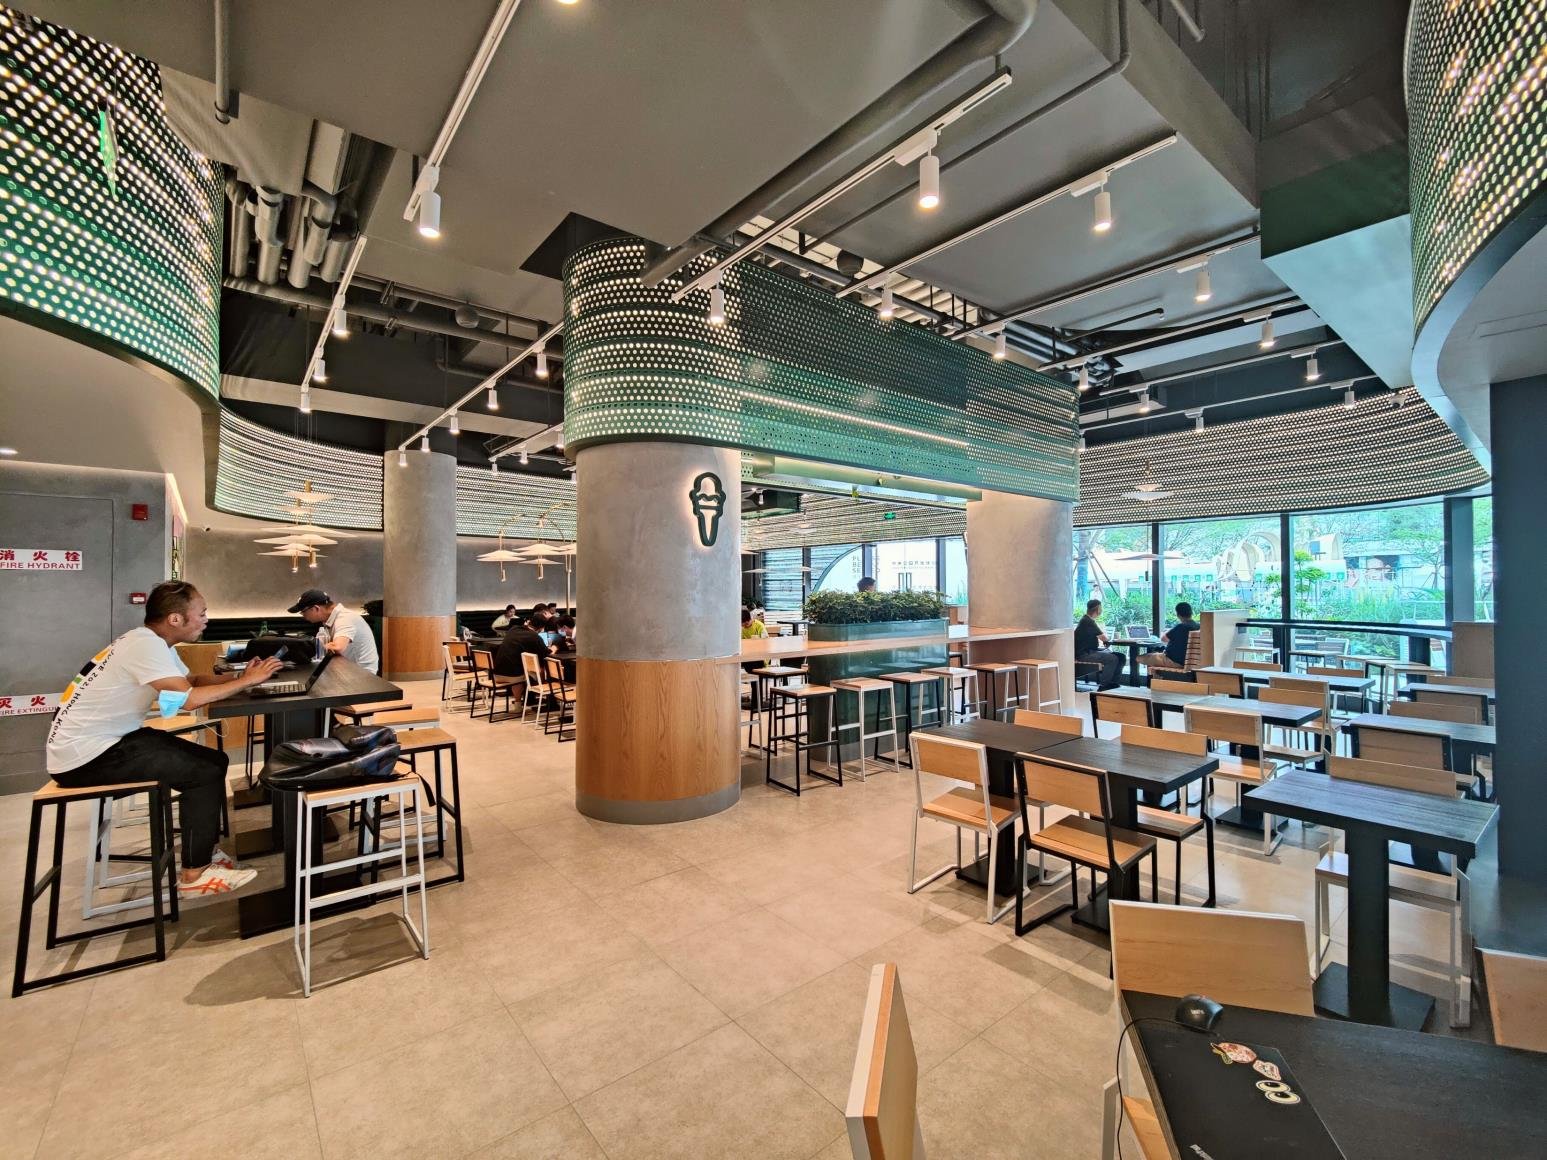 EIS sourced and installed furniture to Shake Shack specifications